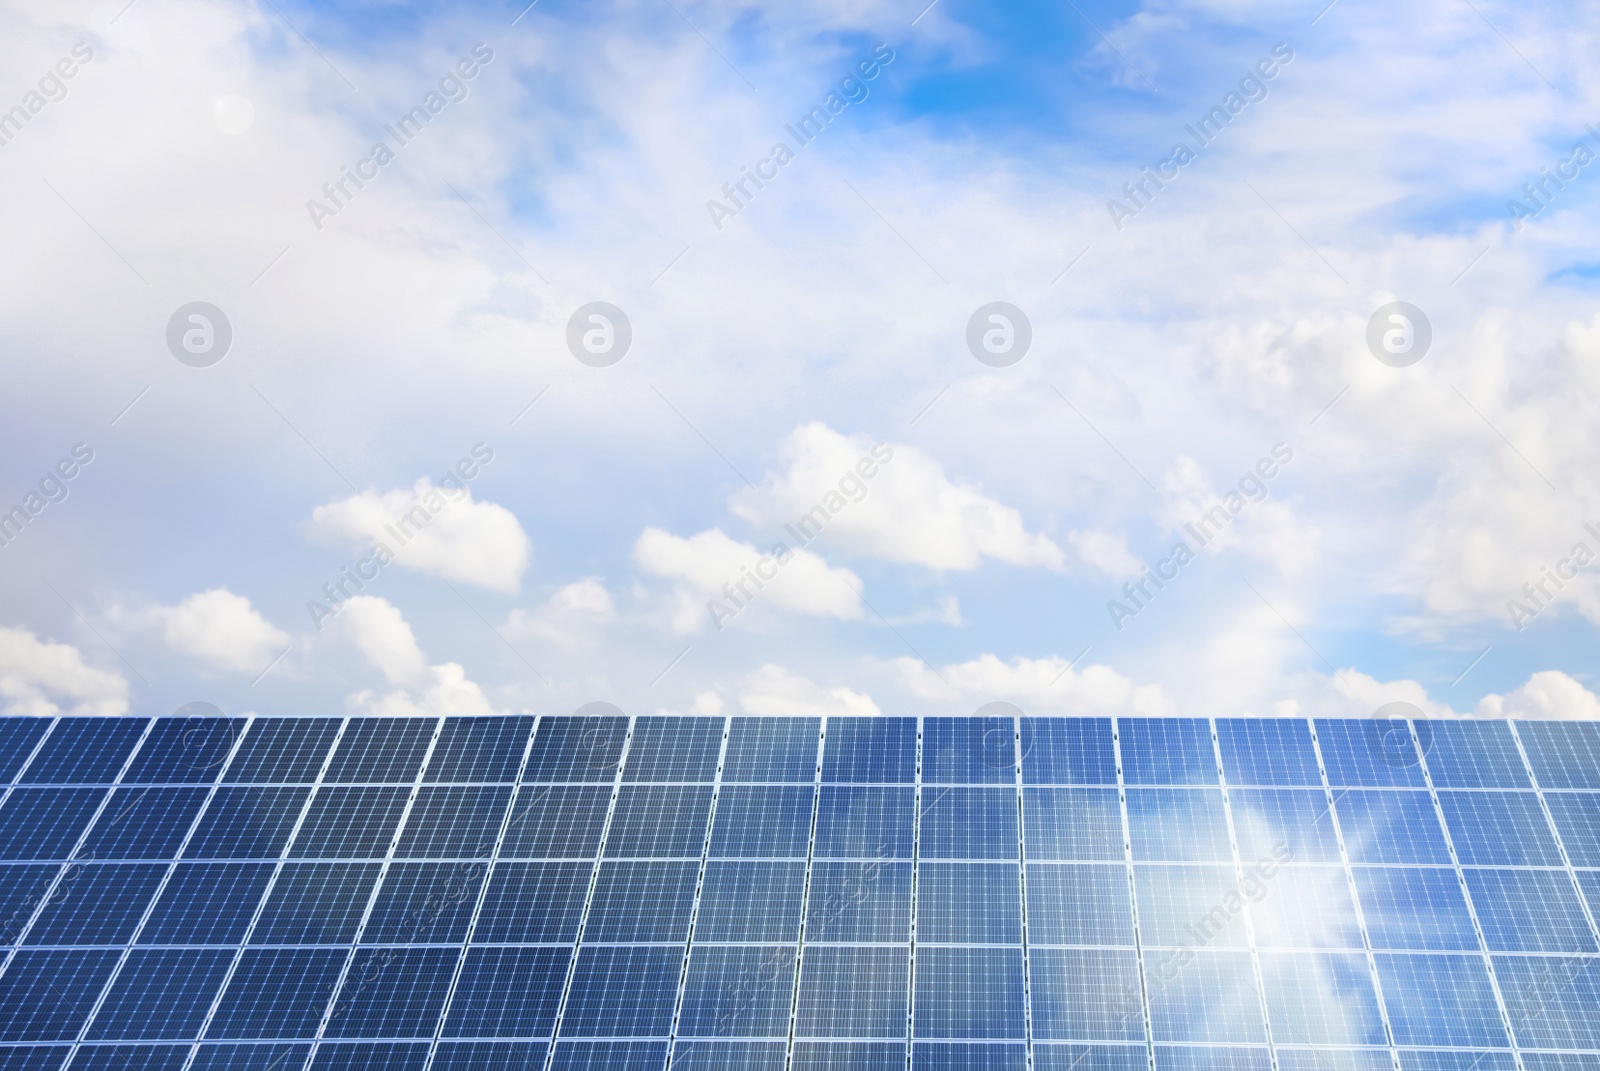 Image of Solar panels outdoors on sunny day. Alternative energy source